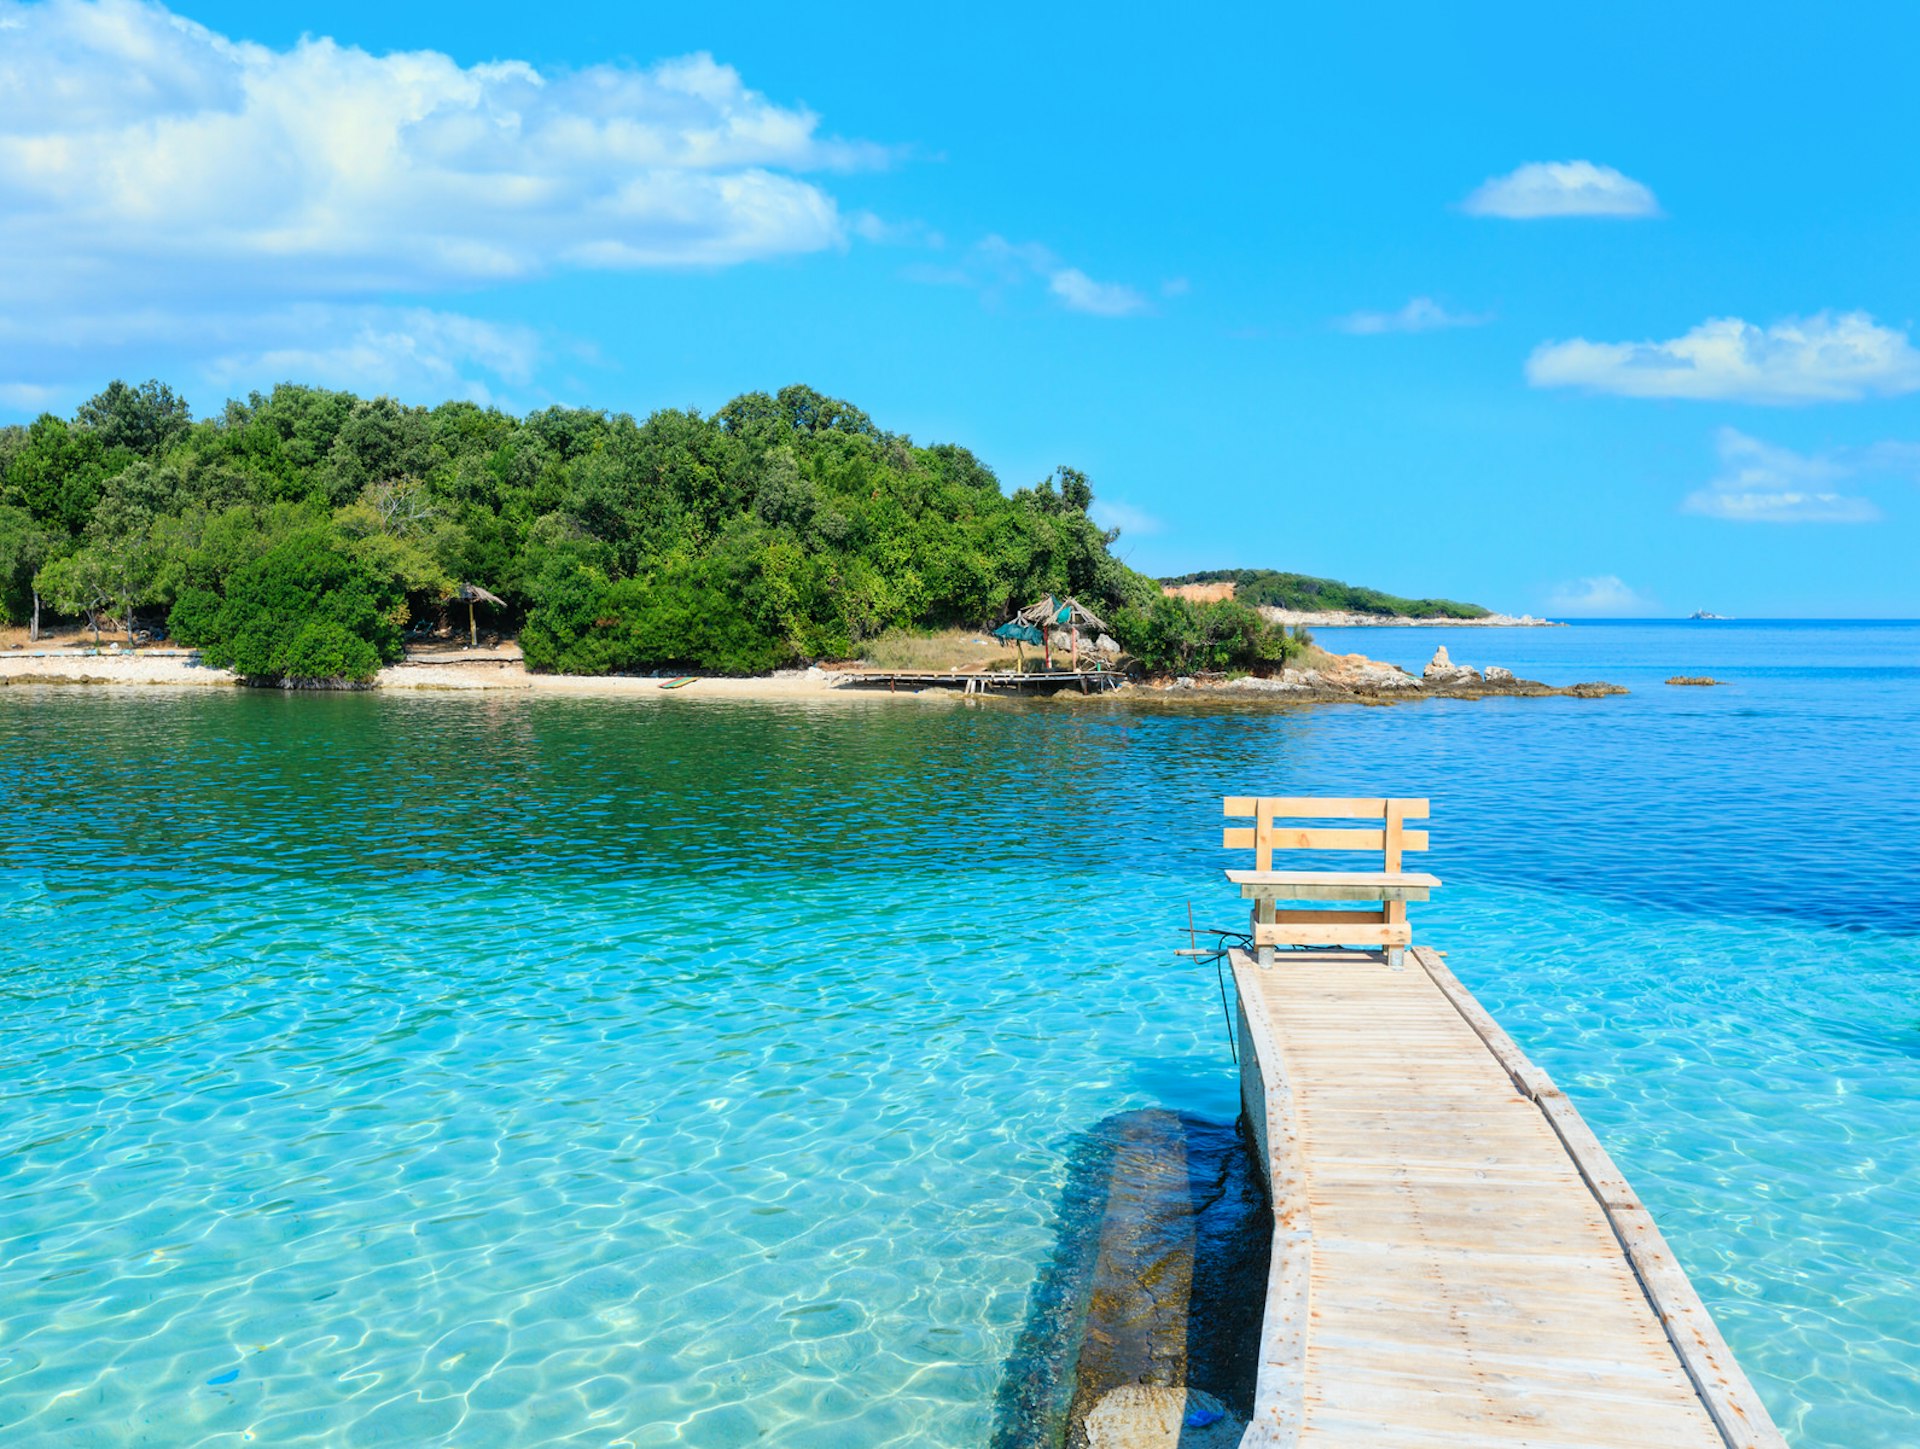 A wooden pier with a bench at the end stretches into shallow blue waters off the coast of Ksamil beach, with a small island, covered in trees, in the distance